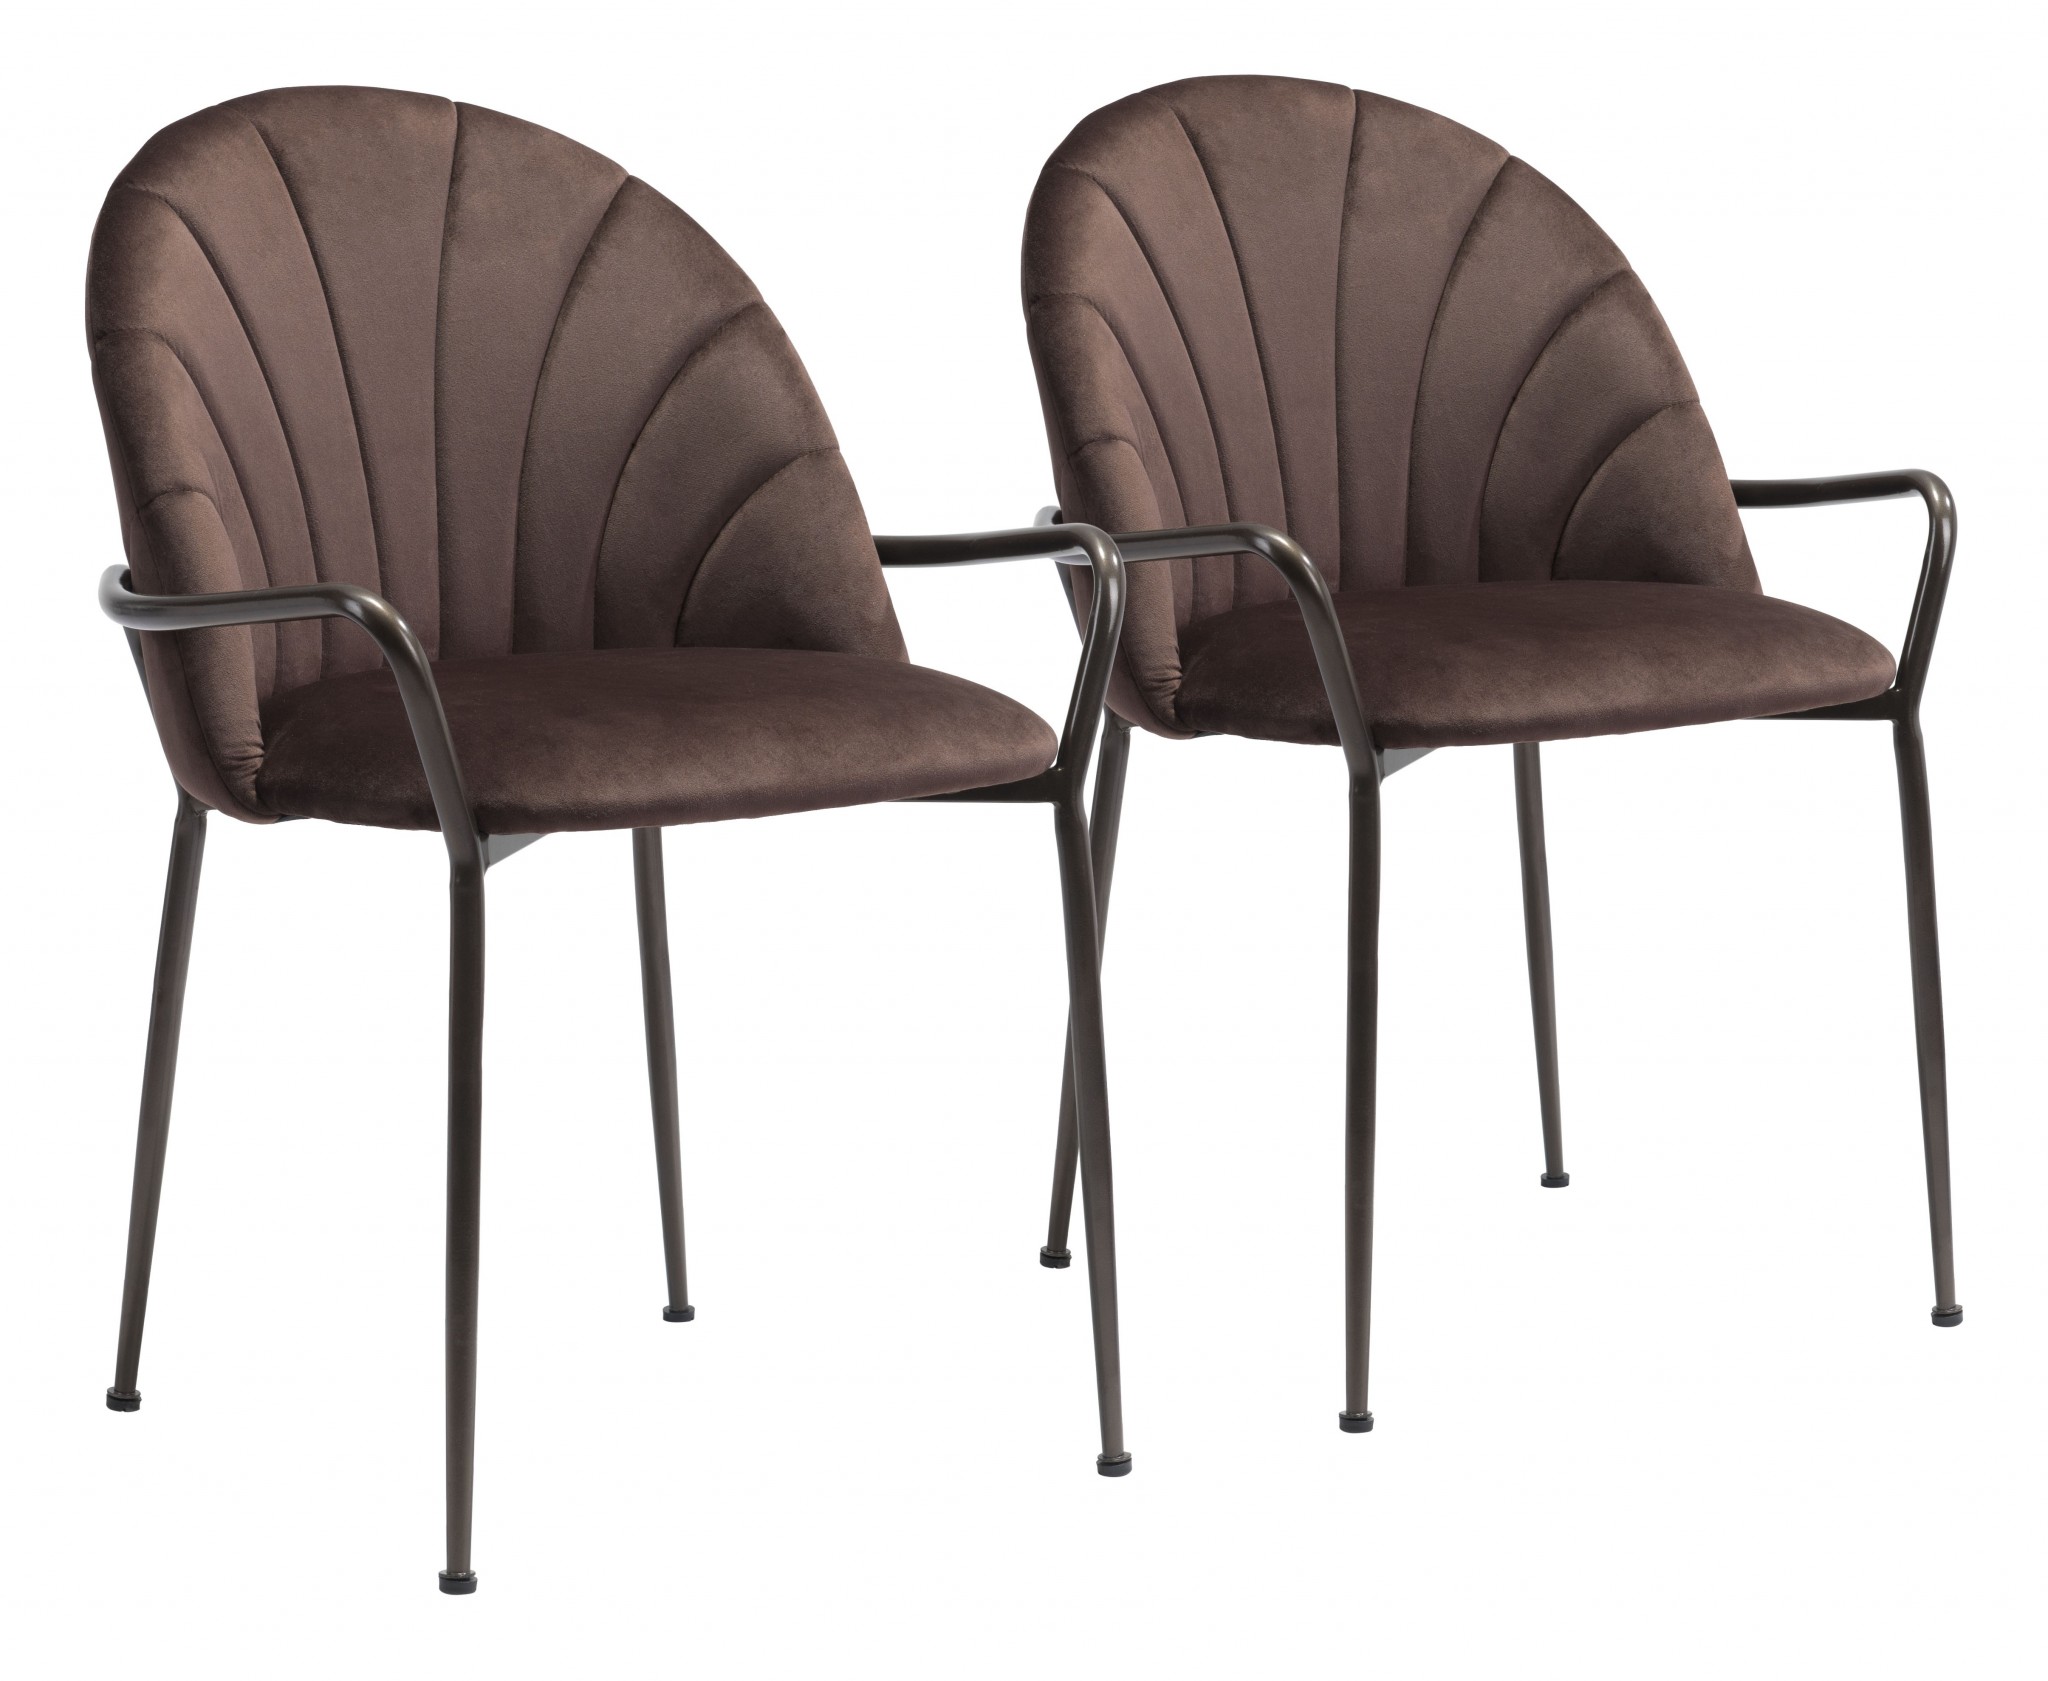 Set of Two Dark Brown Faux Leather Arch Dining Chairs